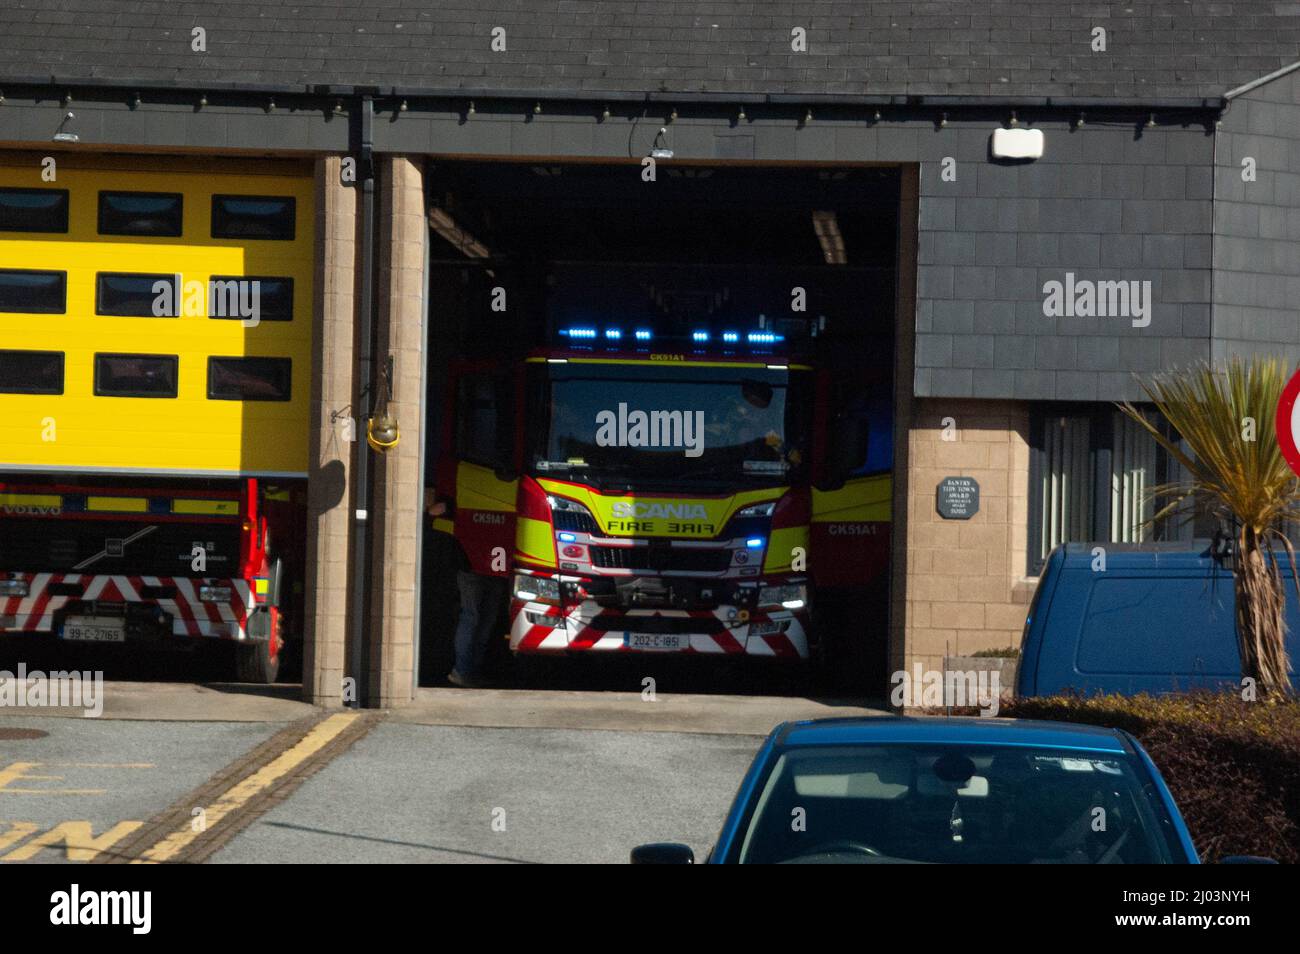 Bantry, West Cork, Ireland, Wednesday 16 Mar, 2022; County Cork's fire crews are struggling to gain full-time jobs. The crews, unlike full-time fire crews, respond to emergency calls when their pager goes off. Some employers are sceptical of leaving staff go to respond to these calls as it may lead to shortages in their businesses. Cork County Cllr Joe Carroll raised the issue after speaking to a West Cork firefighter. Bantry's part-time Fire Brigade respond from their station to an emergency today. Credit ED/Alamy Live News Stock Photo